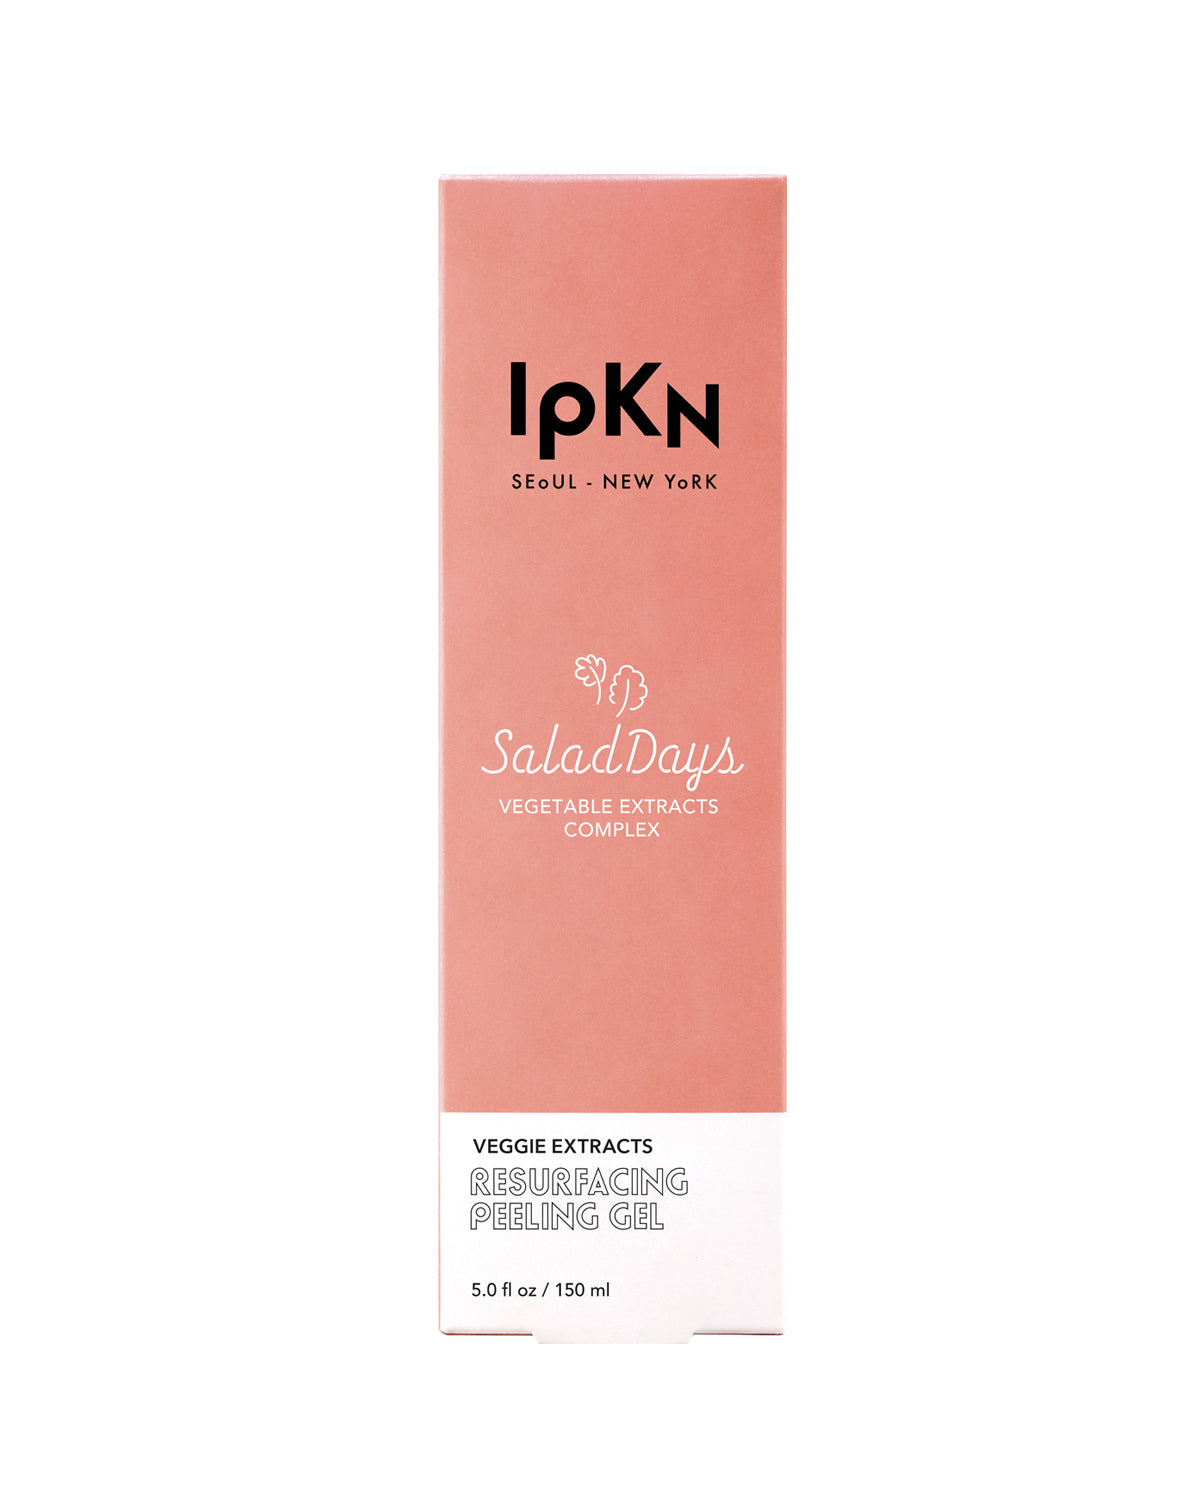 Salad Days!  A lightweight peeling gel works as a physical exfoliant to gently yet effectively buffs away all dead skin cells, excess sebum, and impurities.   This customizable resurfacing peeling gel is for the most sensitive to the most resilient of skin types helping aid in removal of impurities while re-balancing skin's hydration and protecting skin's natural moisture barrier. 